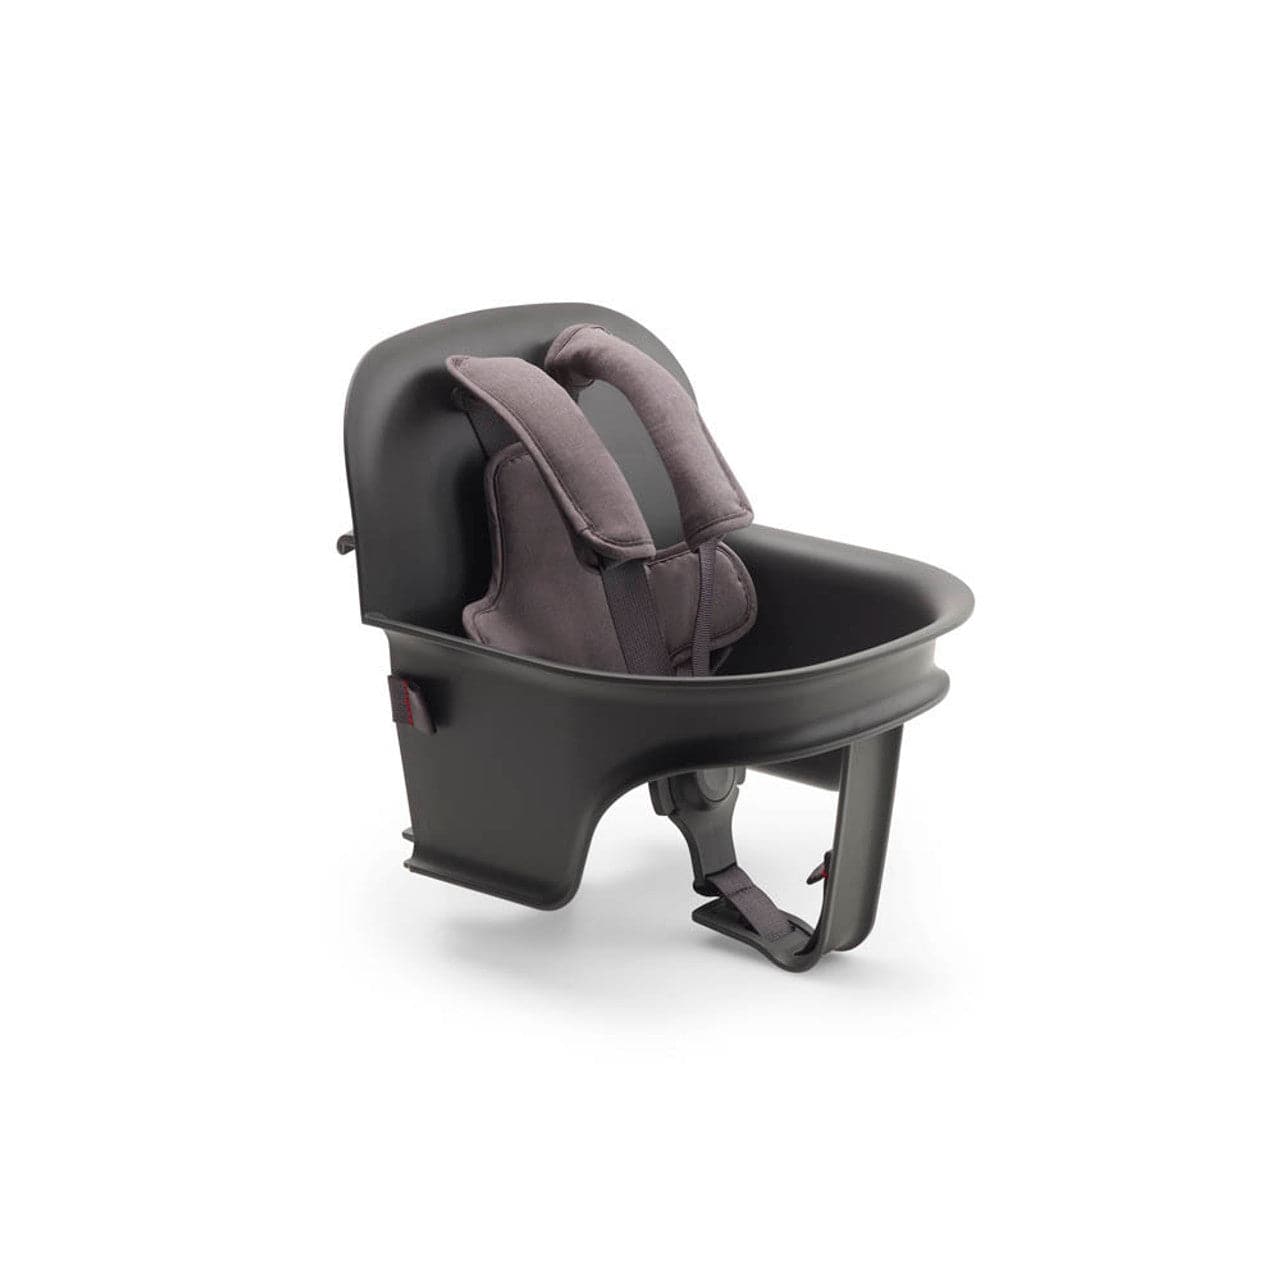 Bugaboo Giraffe Baby Set - Grey - For Your Little One